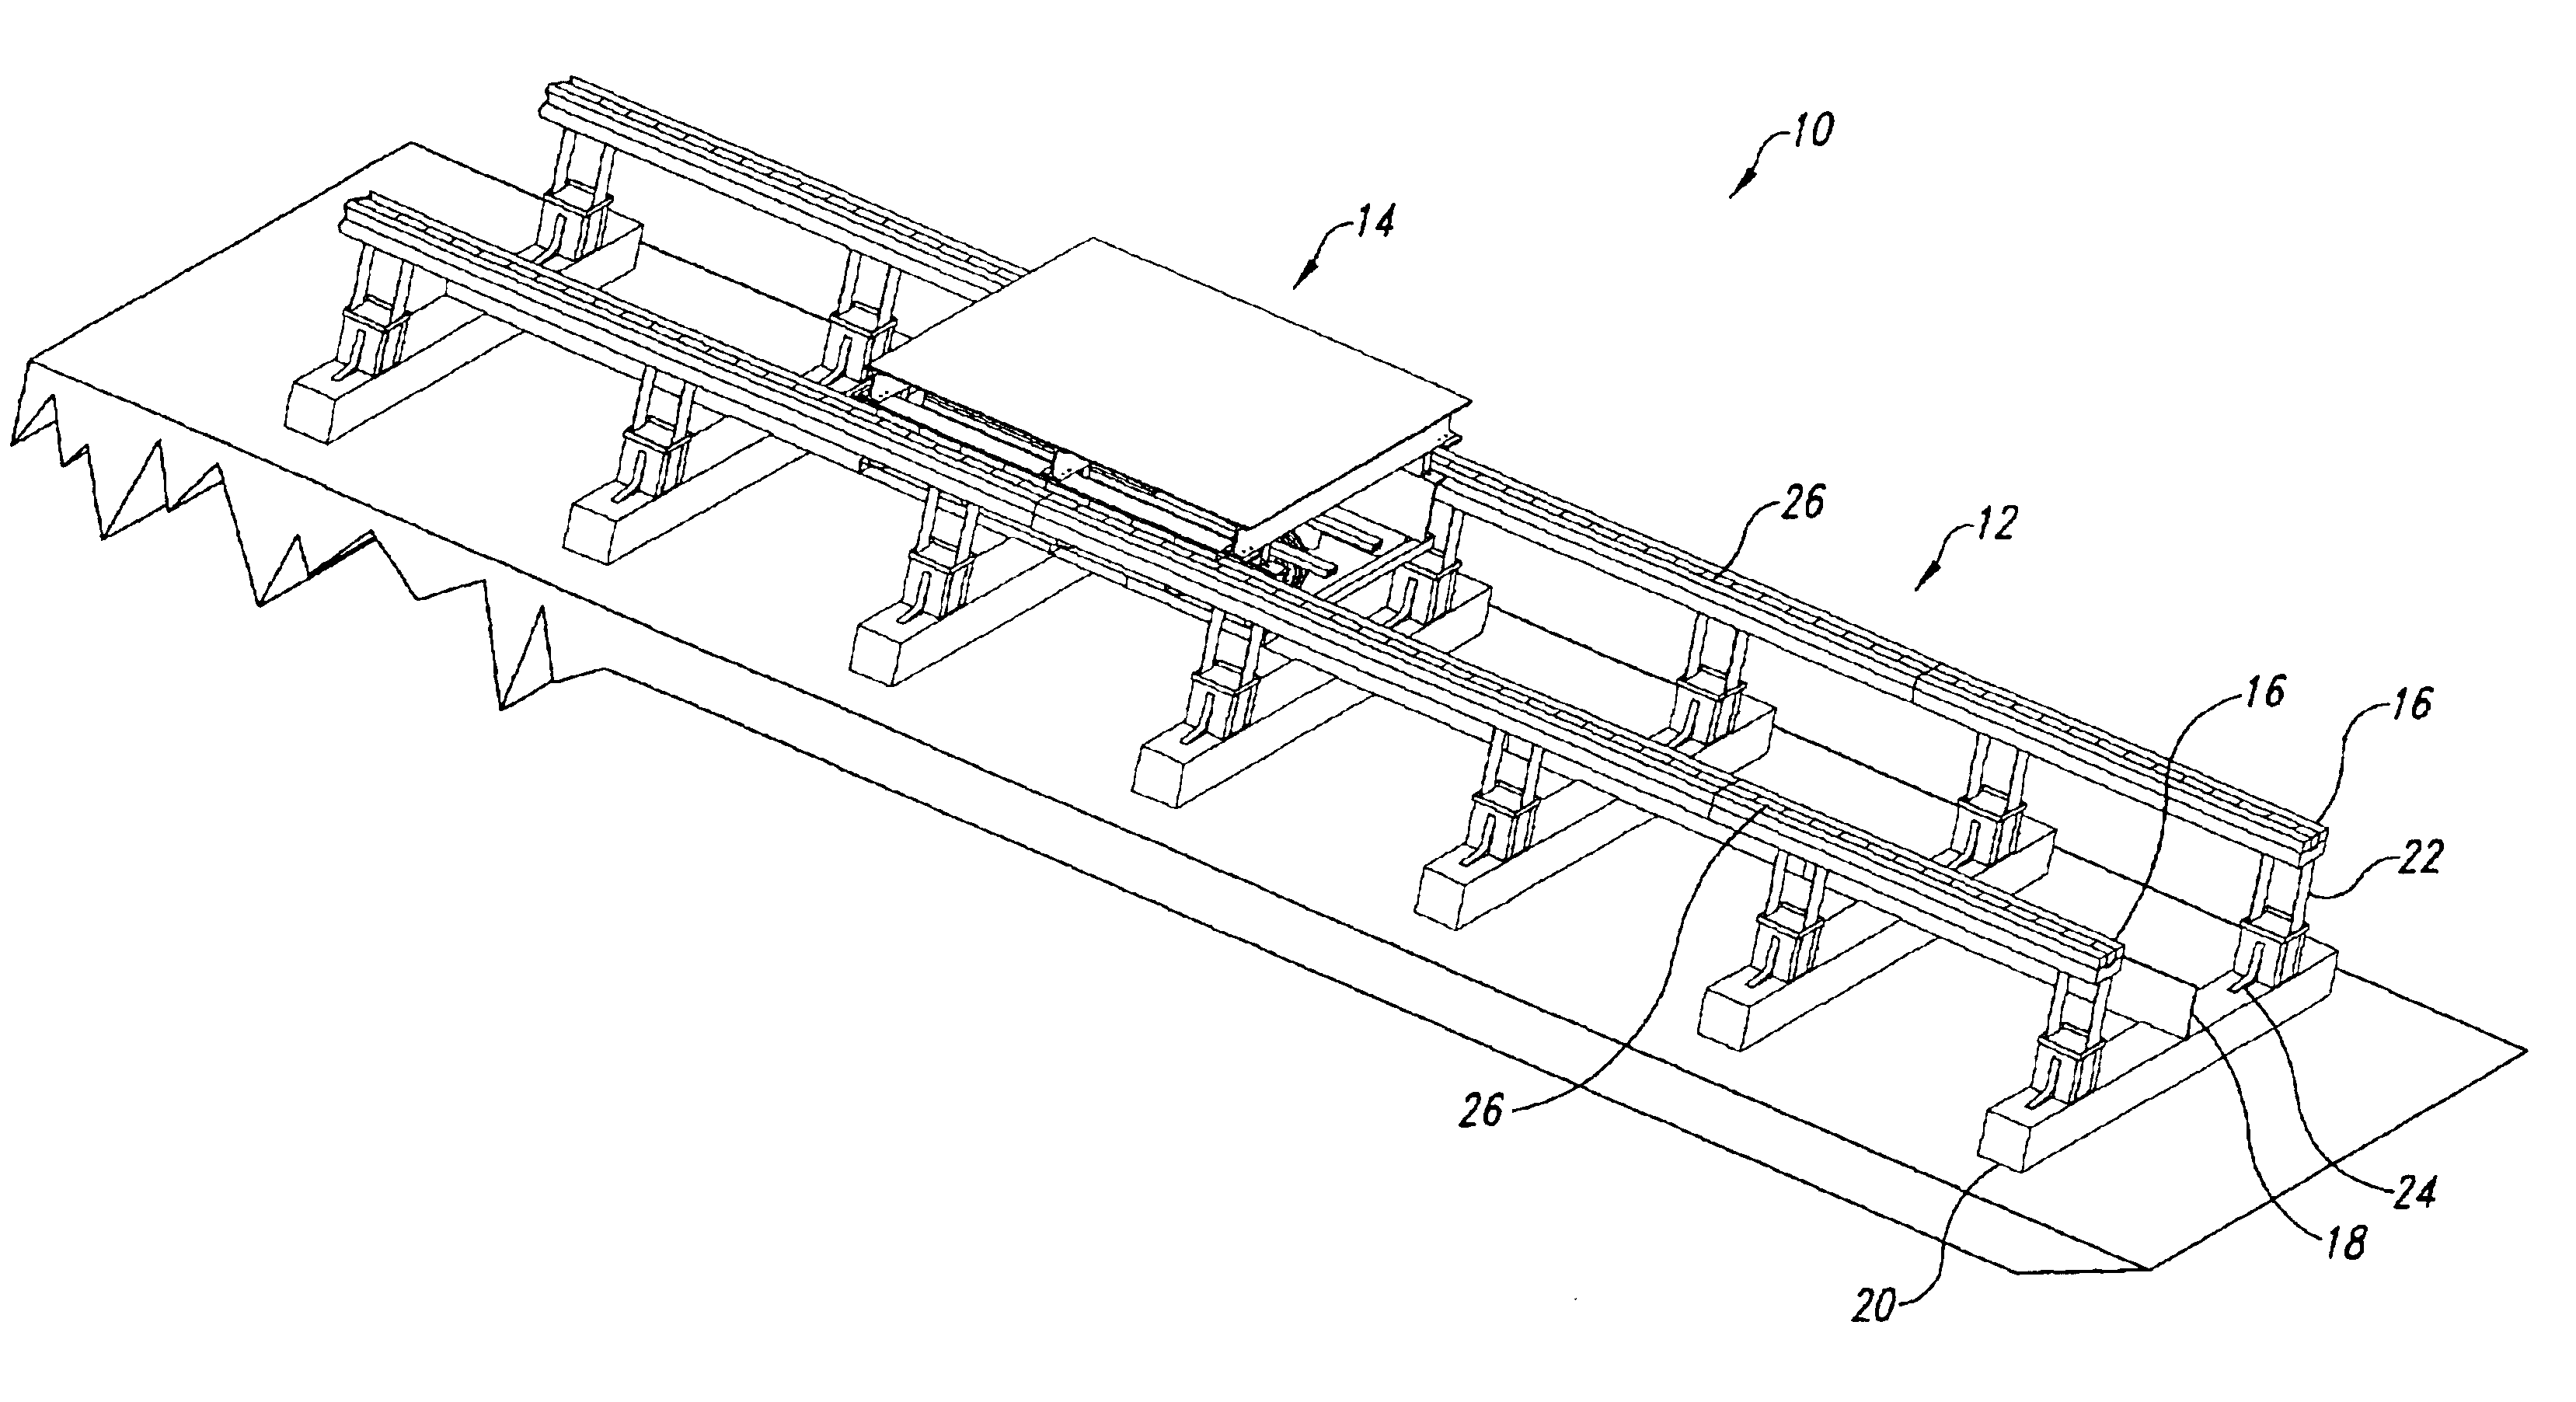 Apparatus, systems and methods for levitating and moving objects